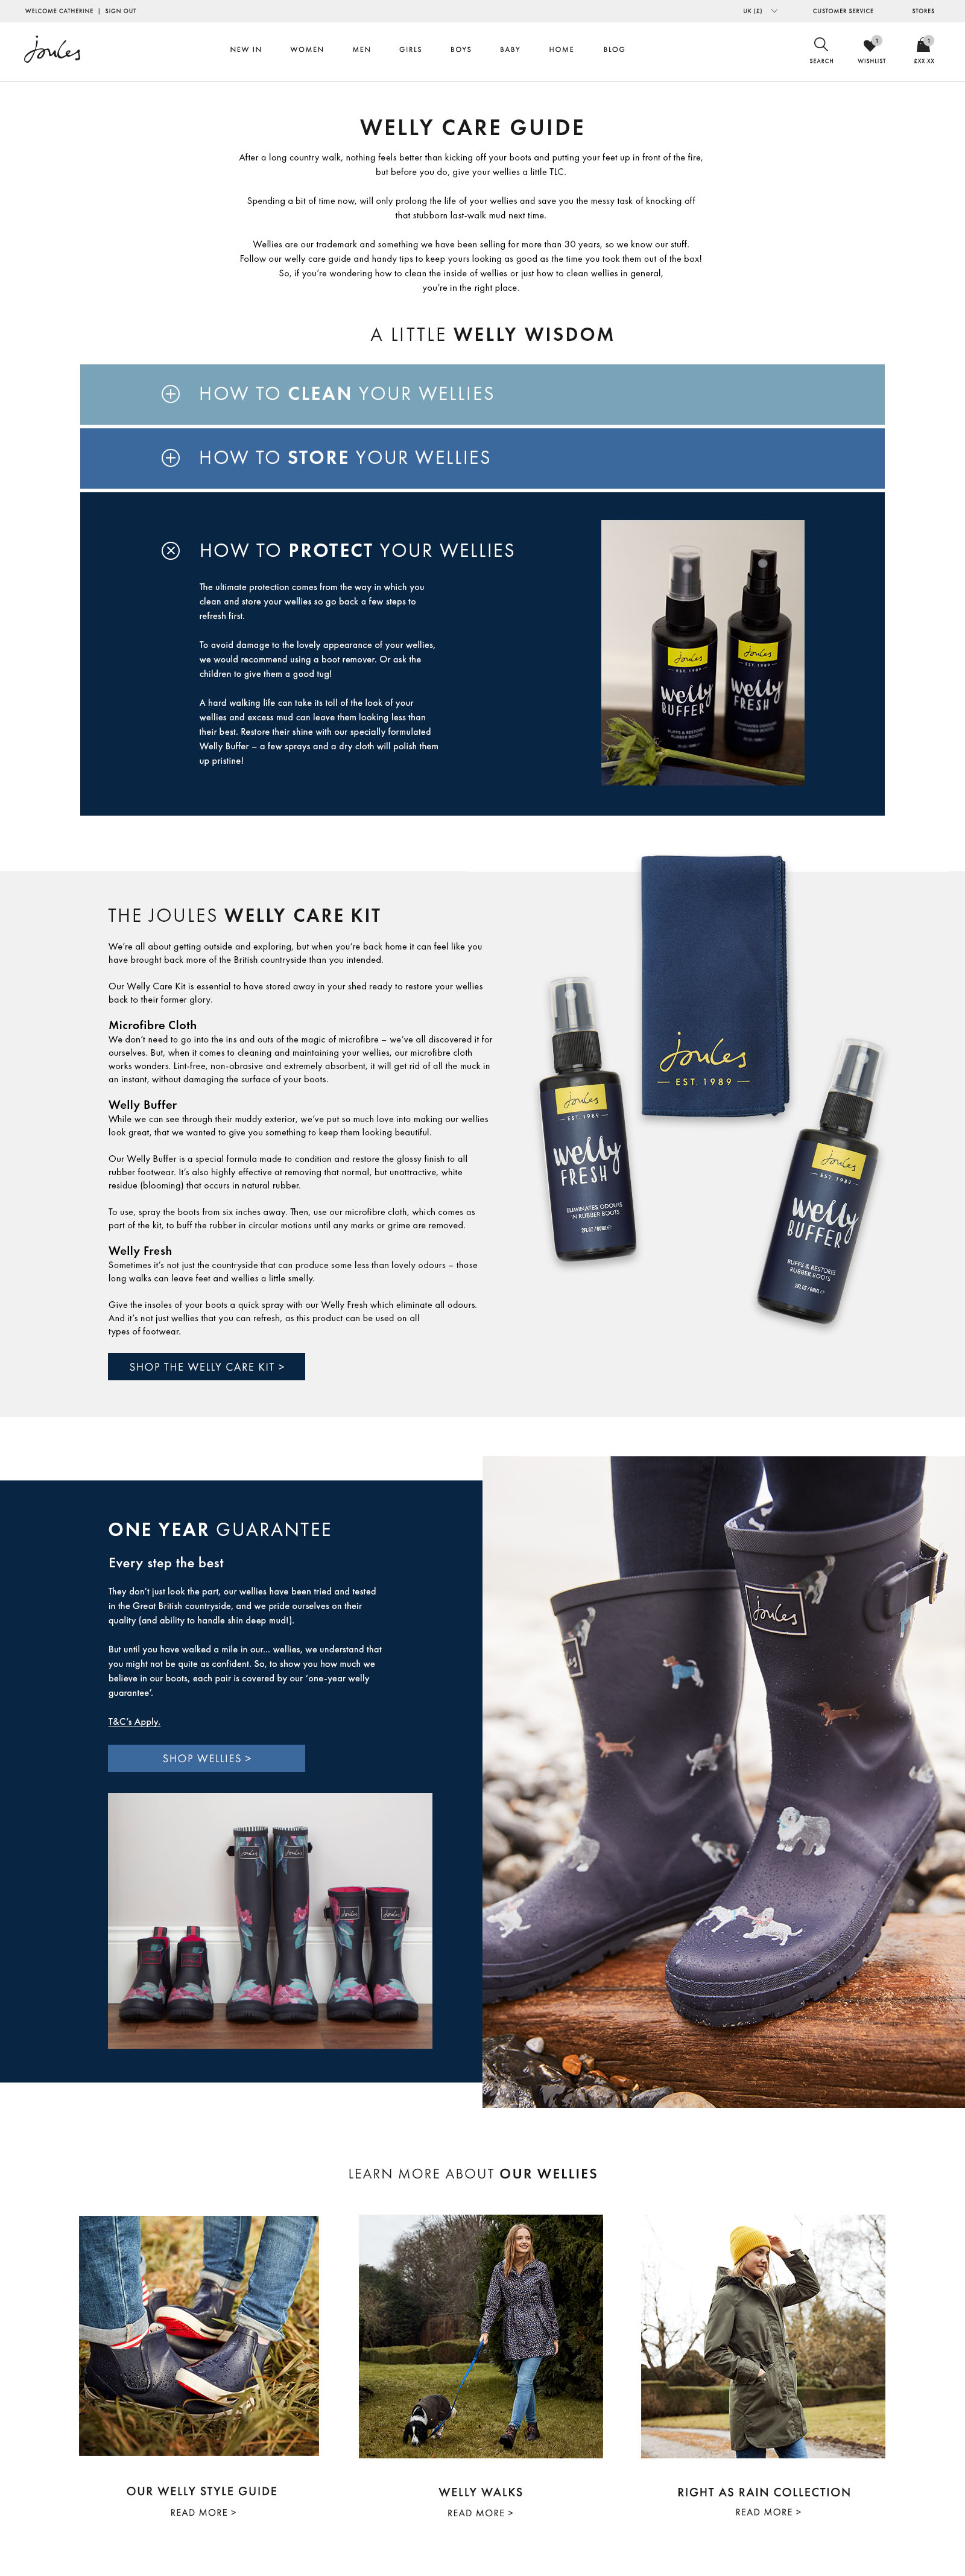 The new welly care guide design.